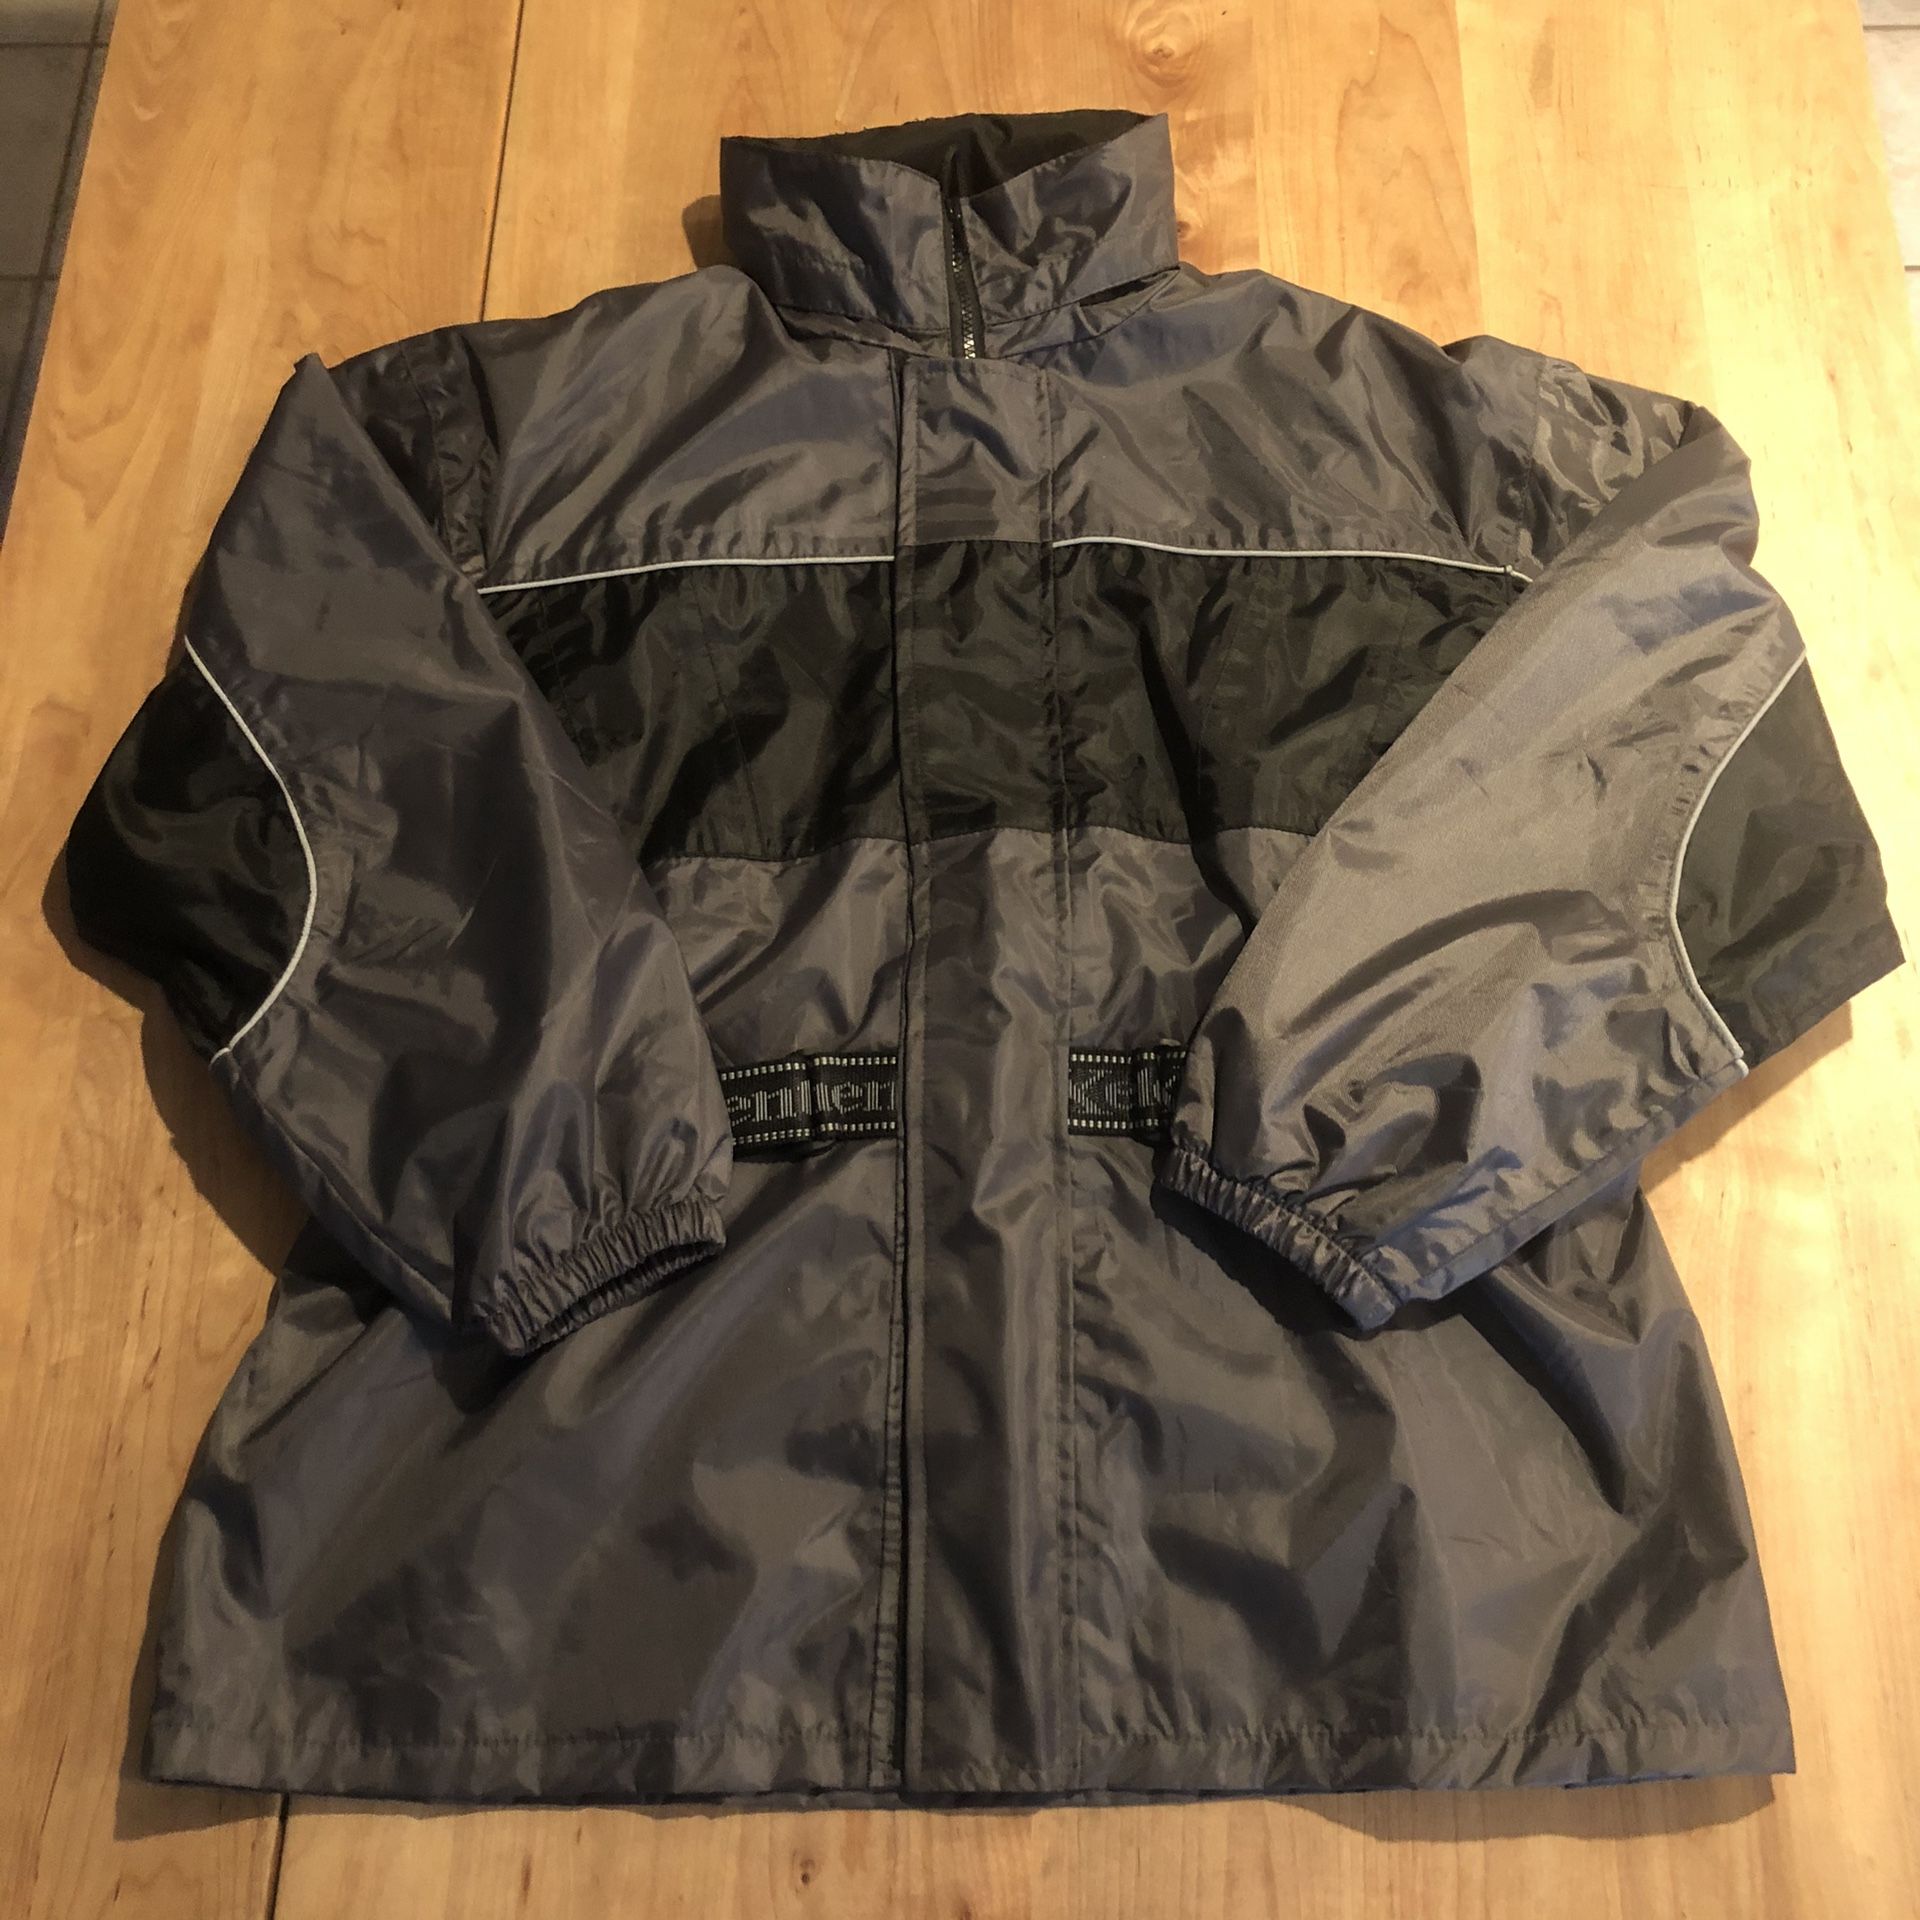 Xelement Motorcycle Jacket Men’s Medium and Large Excellent Condition!!